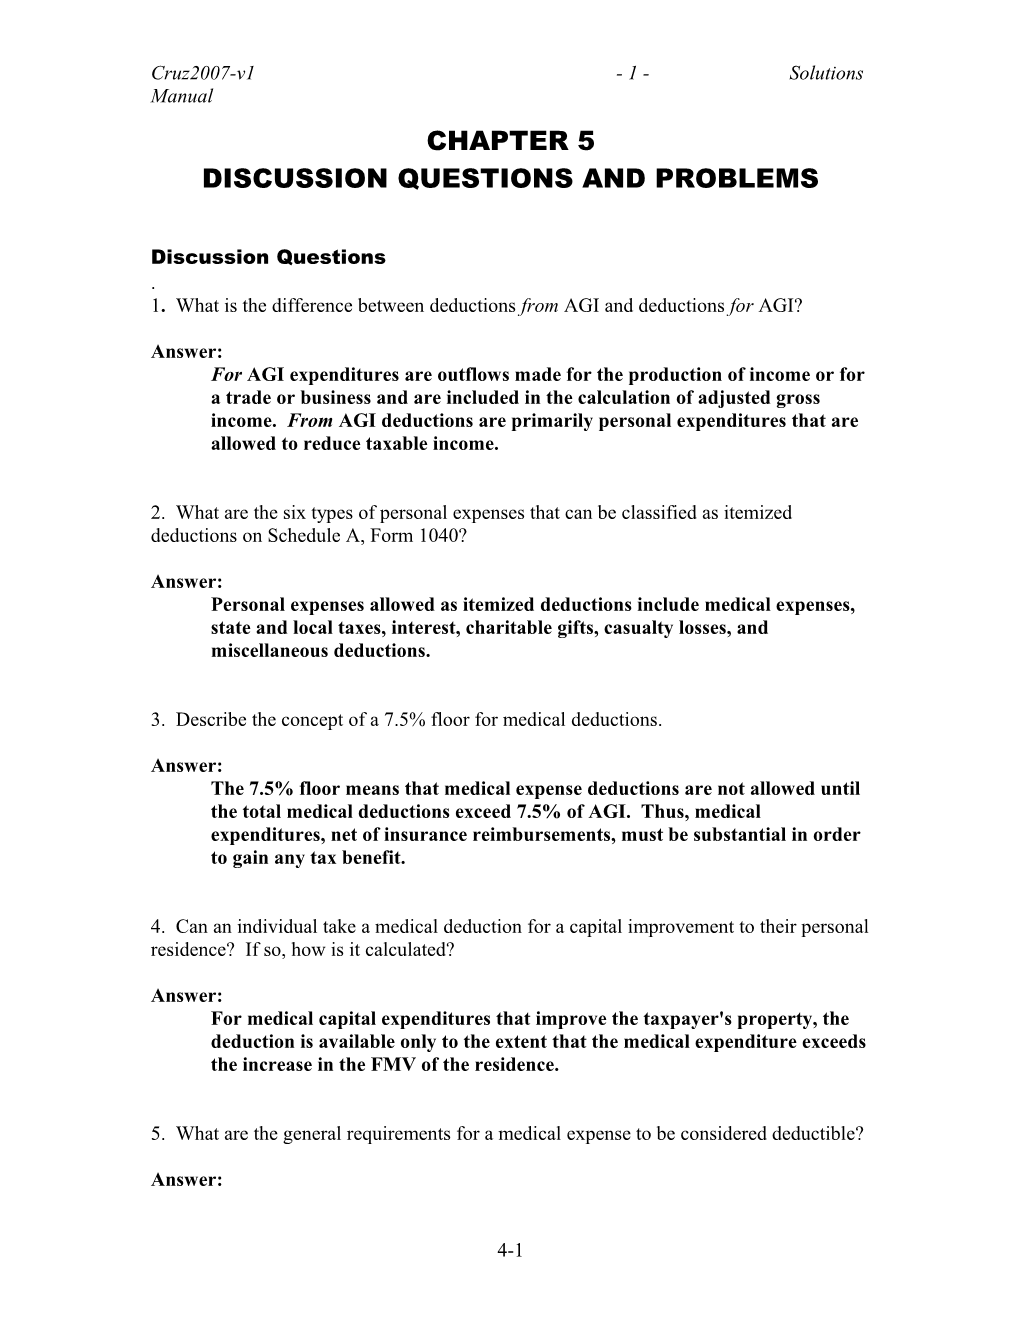 Discussion Questions and Problems